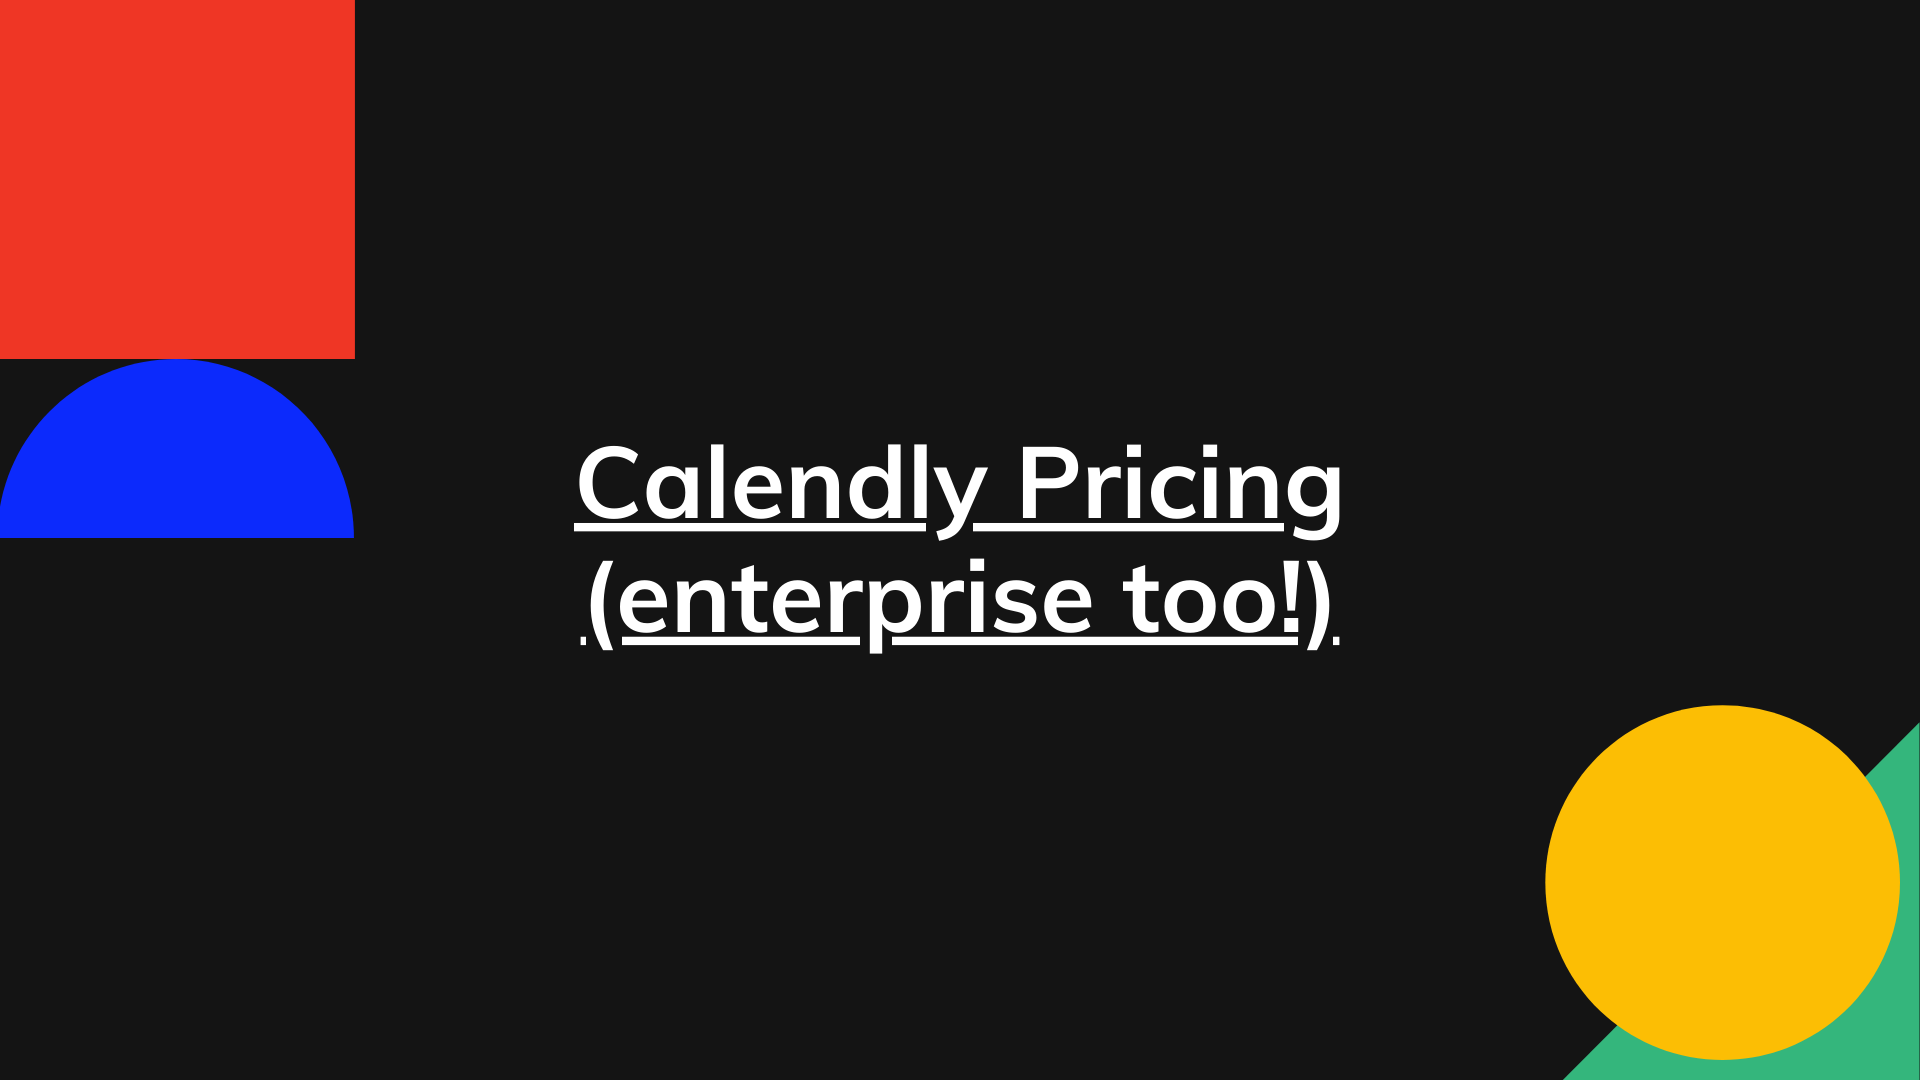 Calendly Pricing – Prices for All Plans, Including Enterprise